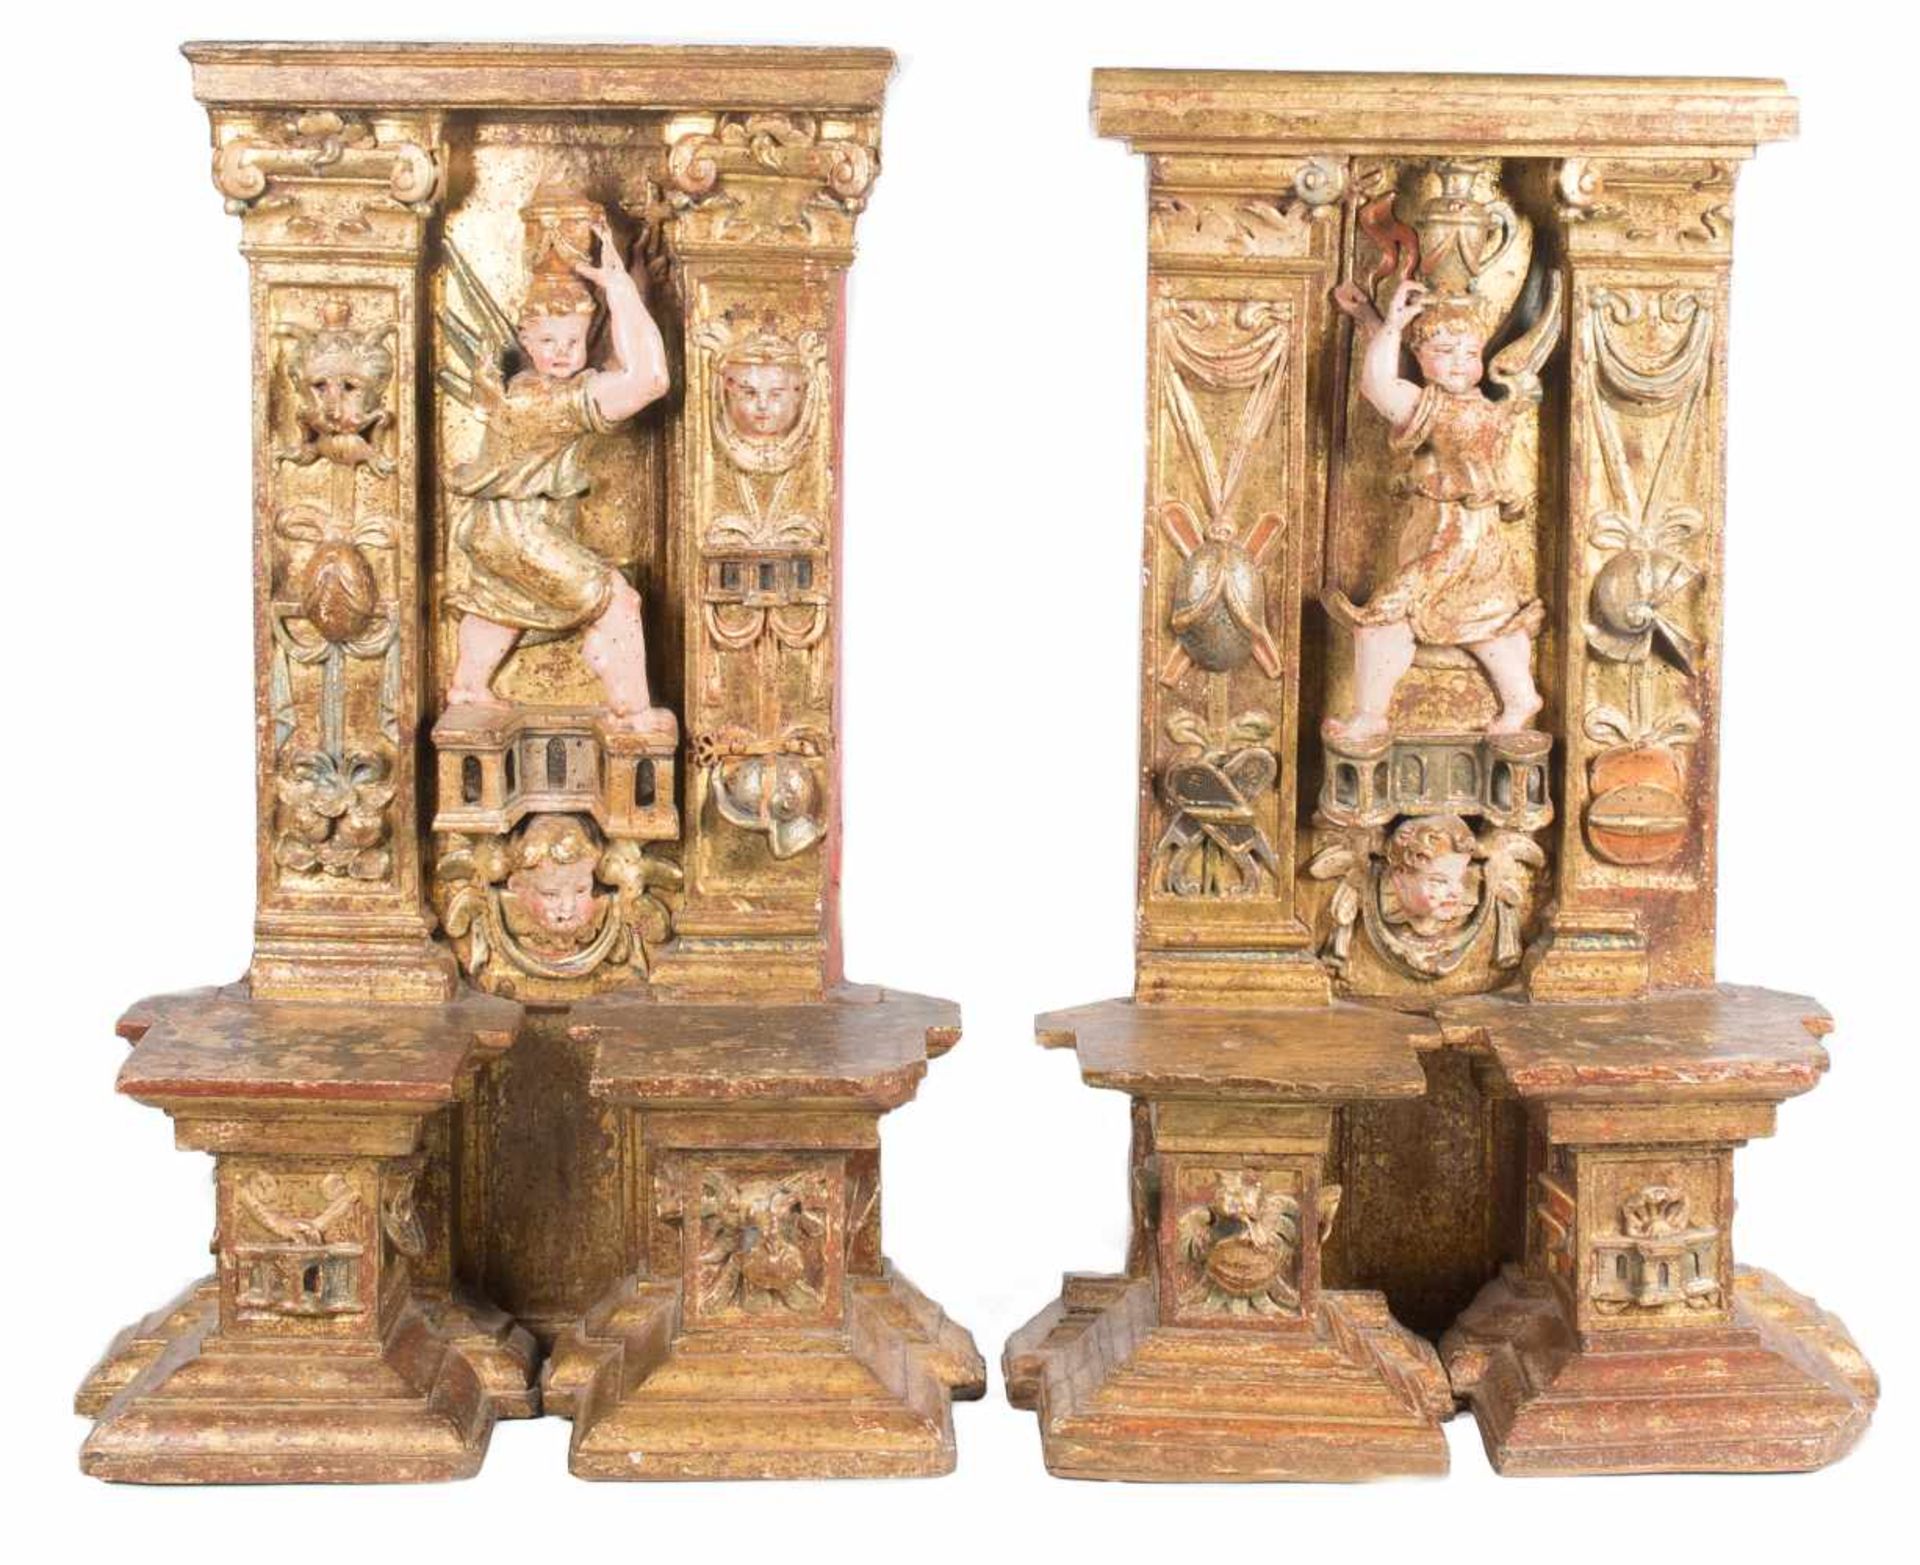 Pair of sections from an altarpiece made of carved, gilded and polychromed wood. Castilian School.